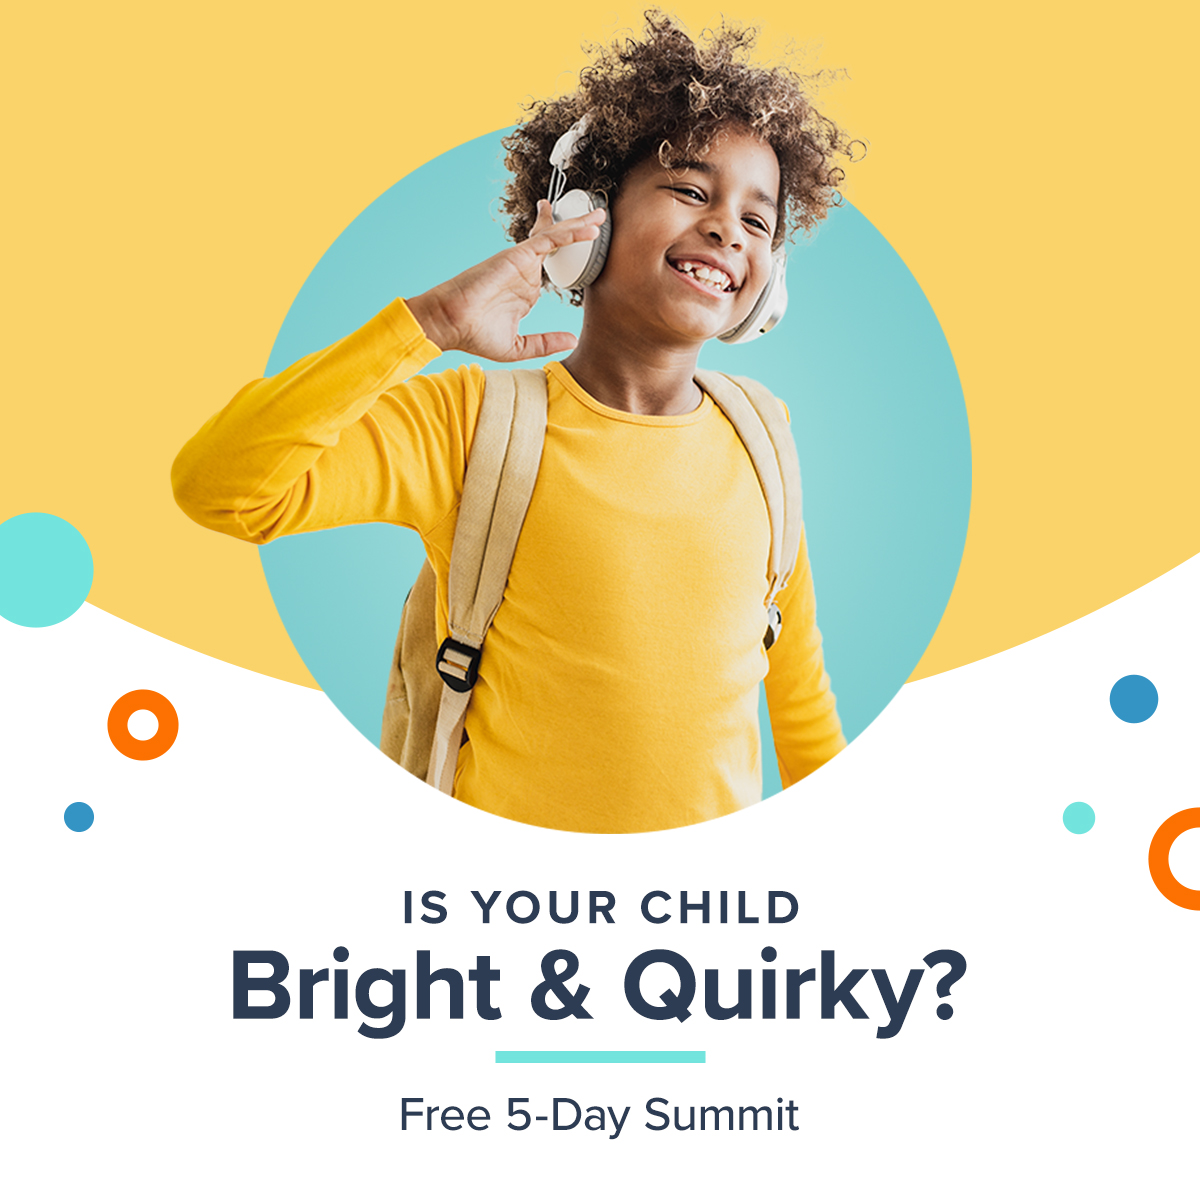 The Bright & Quirky Child Summit 2022